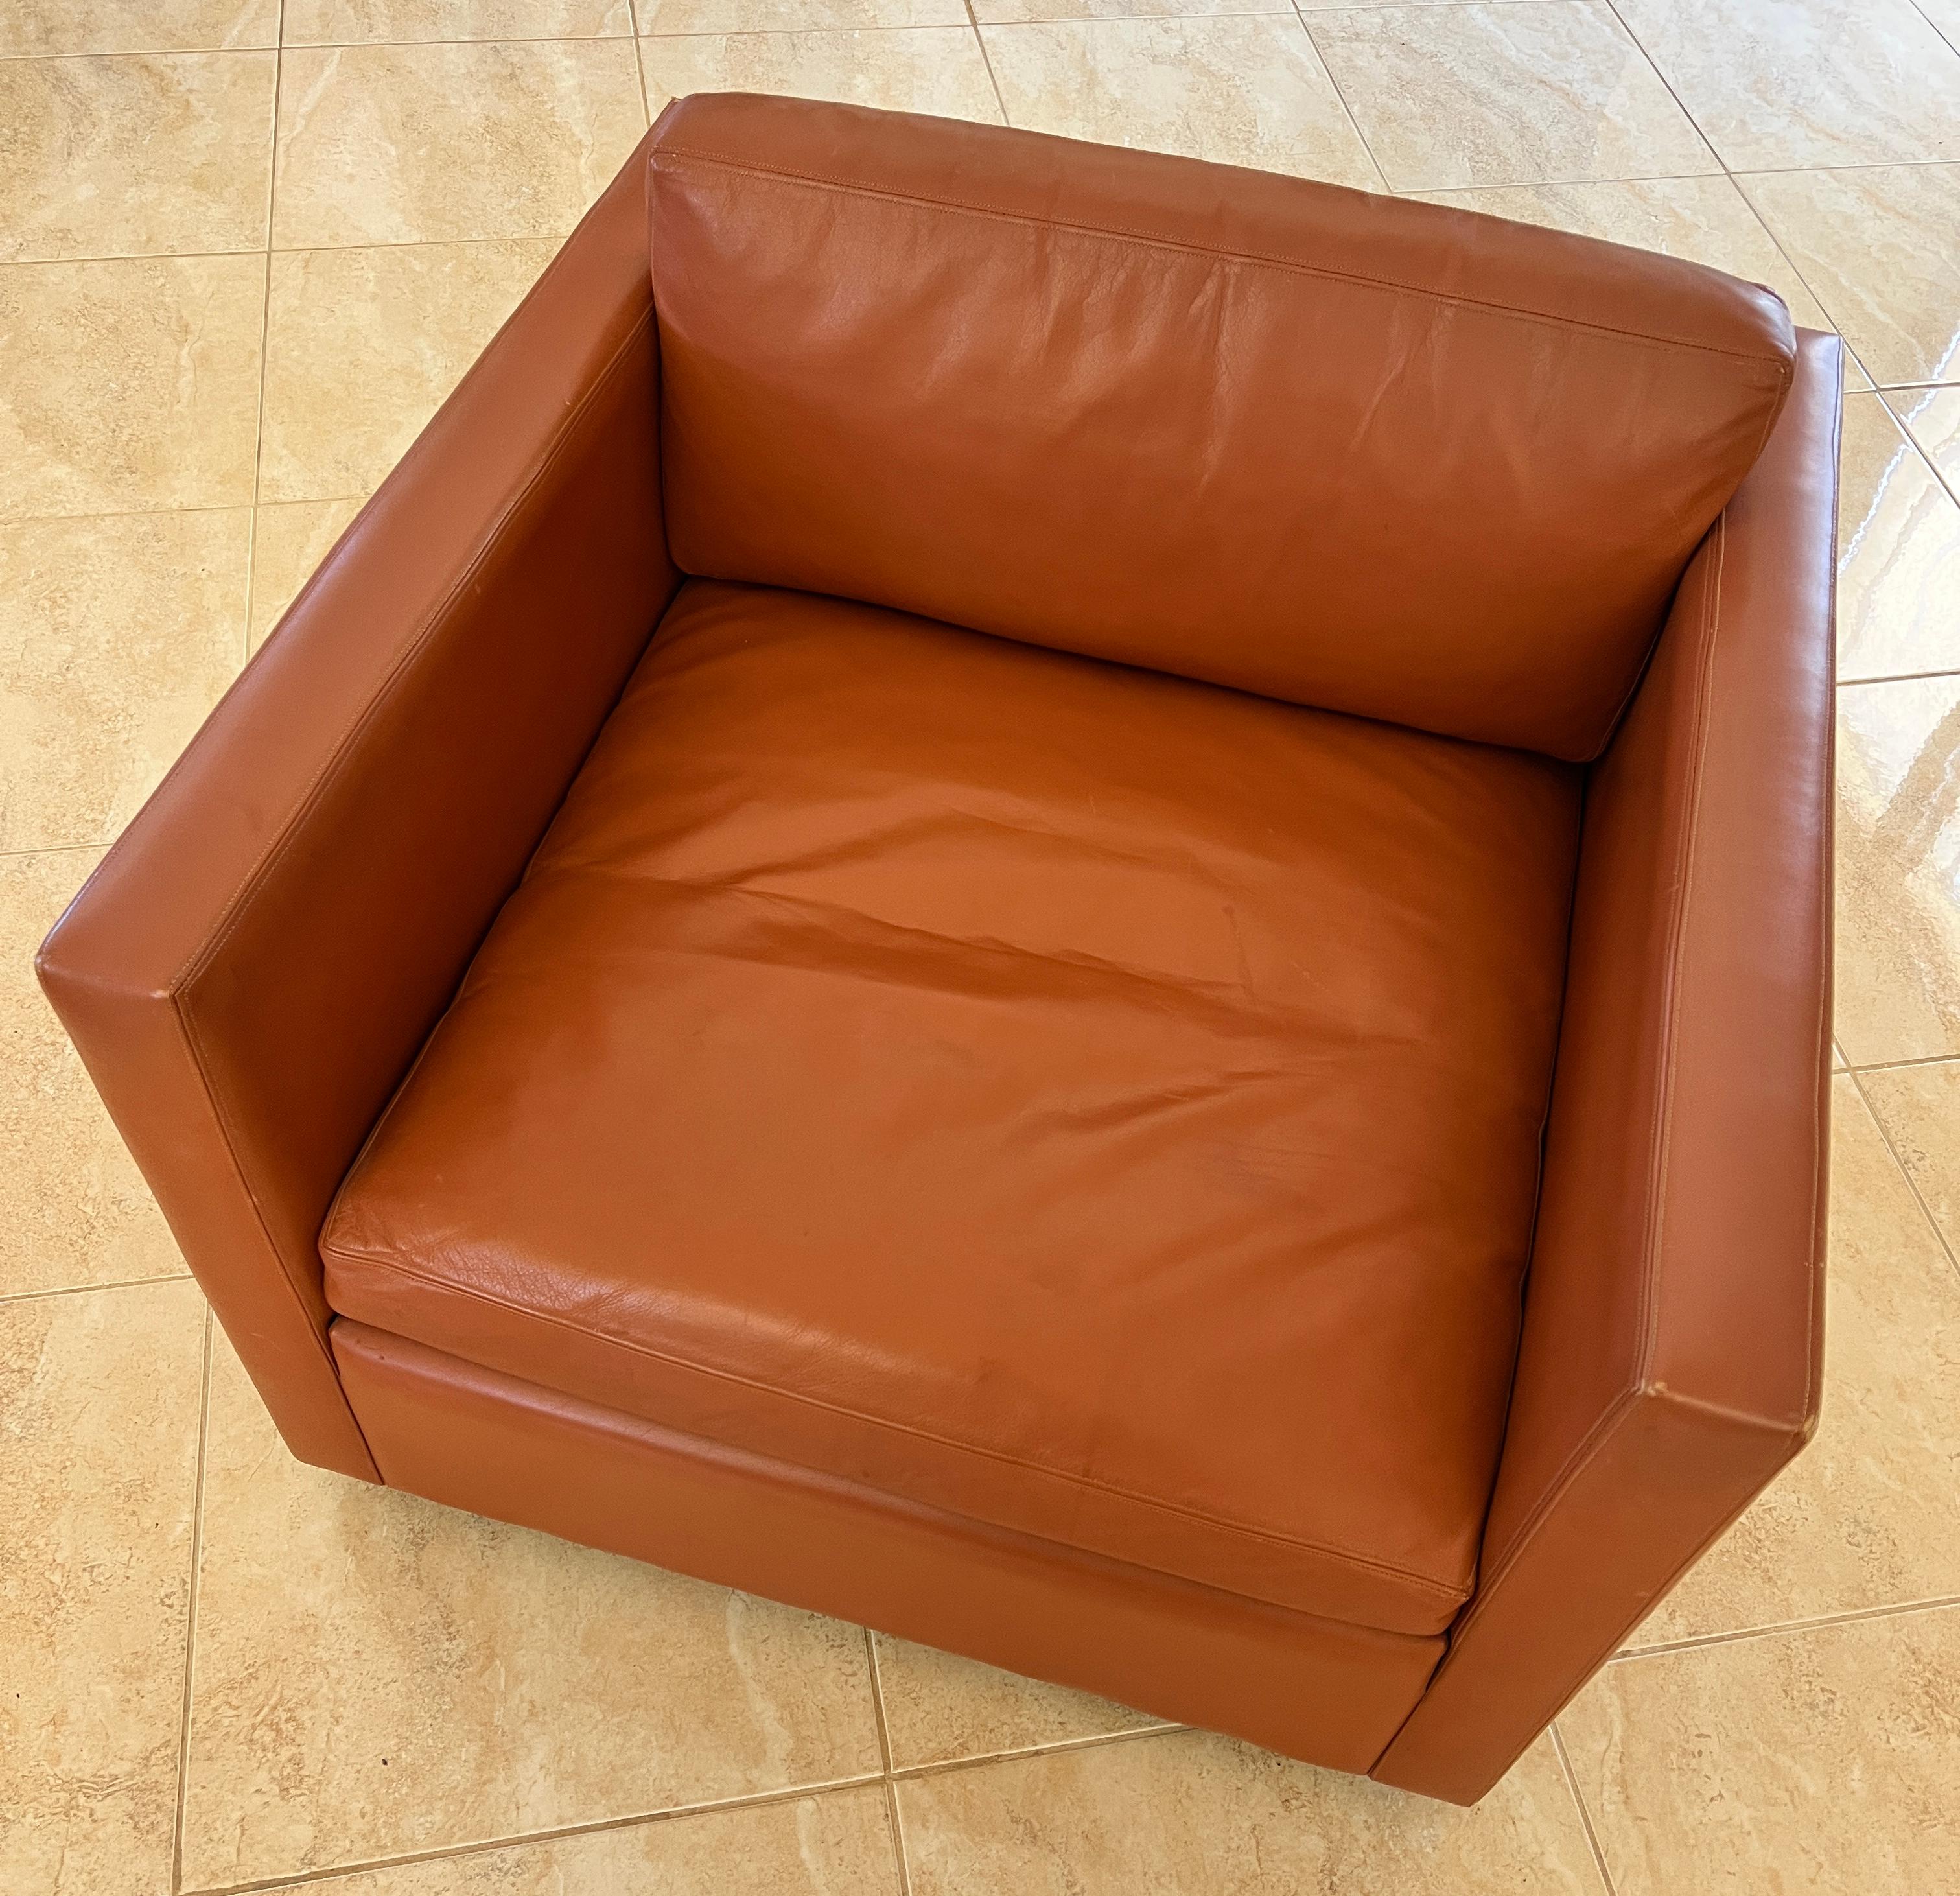 Knoll Cube Lounge Chair by Charles Pfister 1971 Original Sabrina Leather, #2